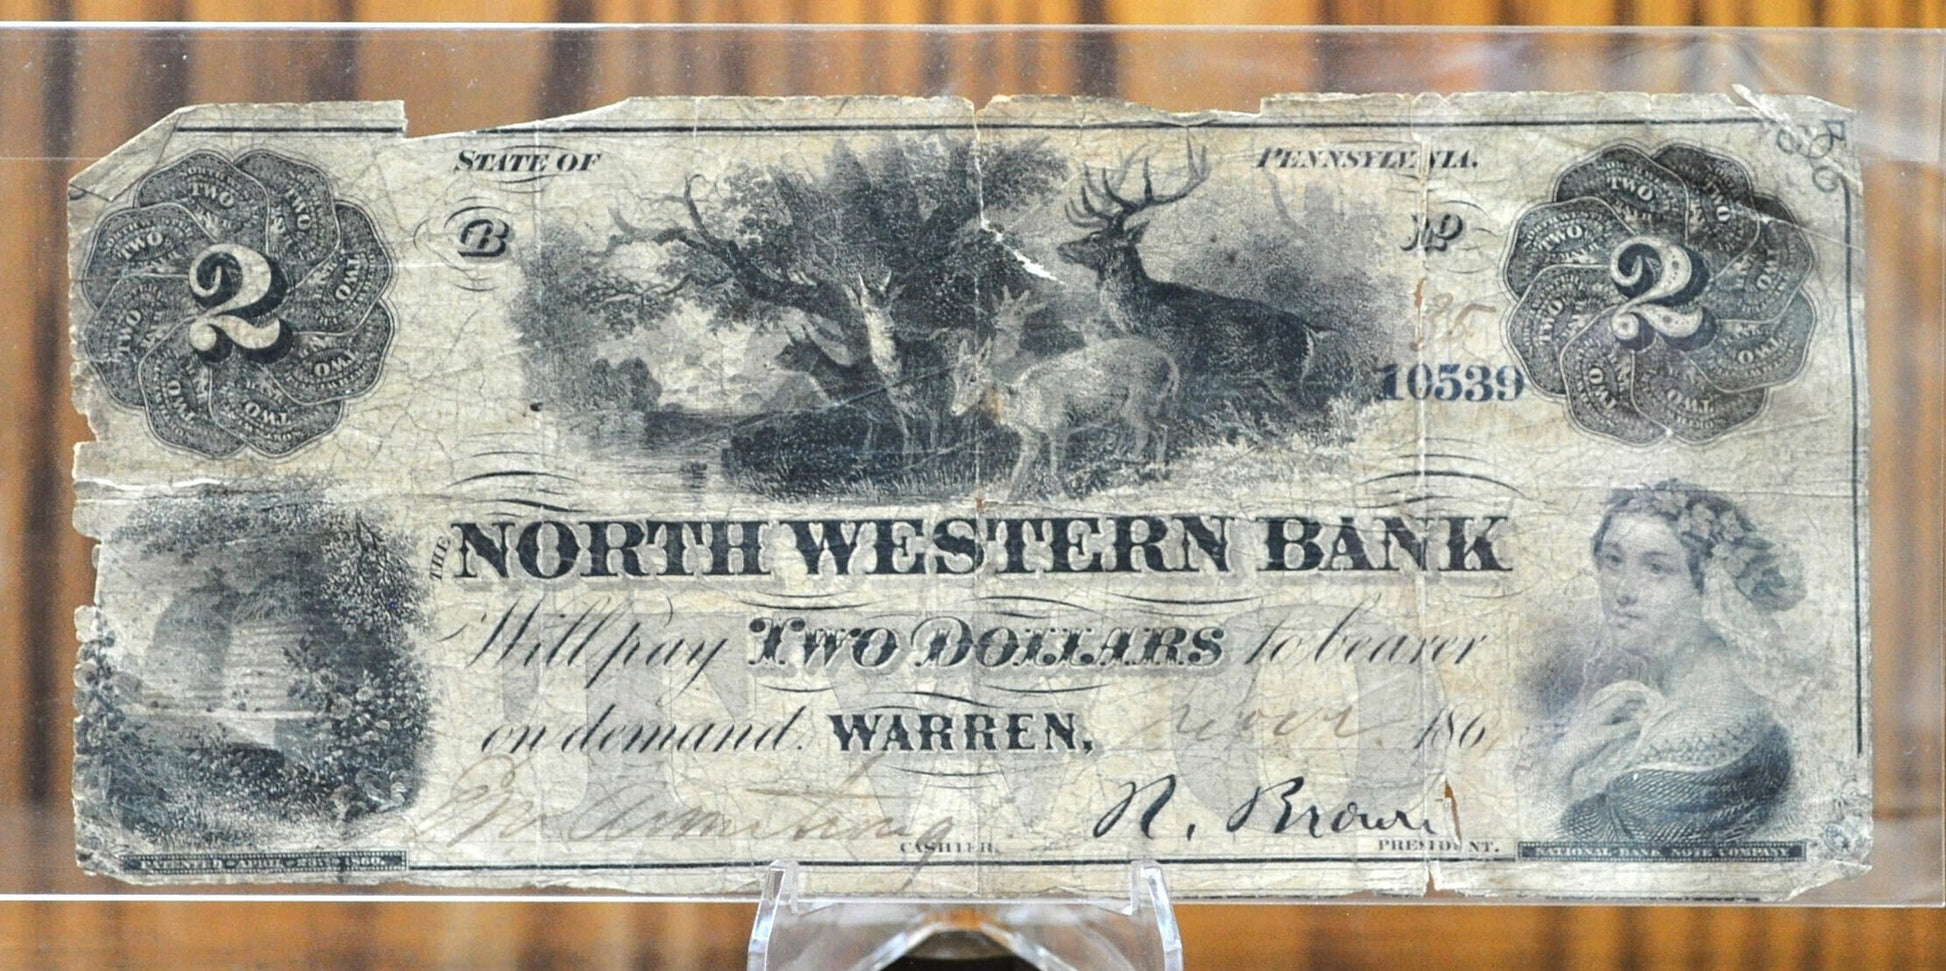 1861 North Western Bank 2 Dollar Paper Banknote - Great Condition - Pennsylvania Obsolete Currency - Two Dollar 1861 PEN